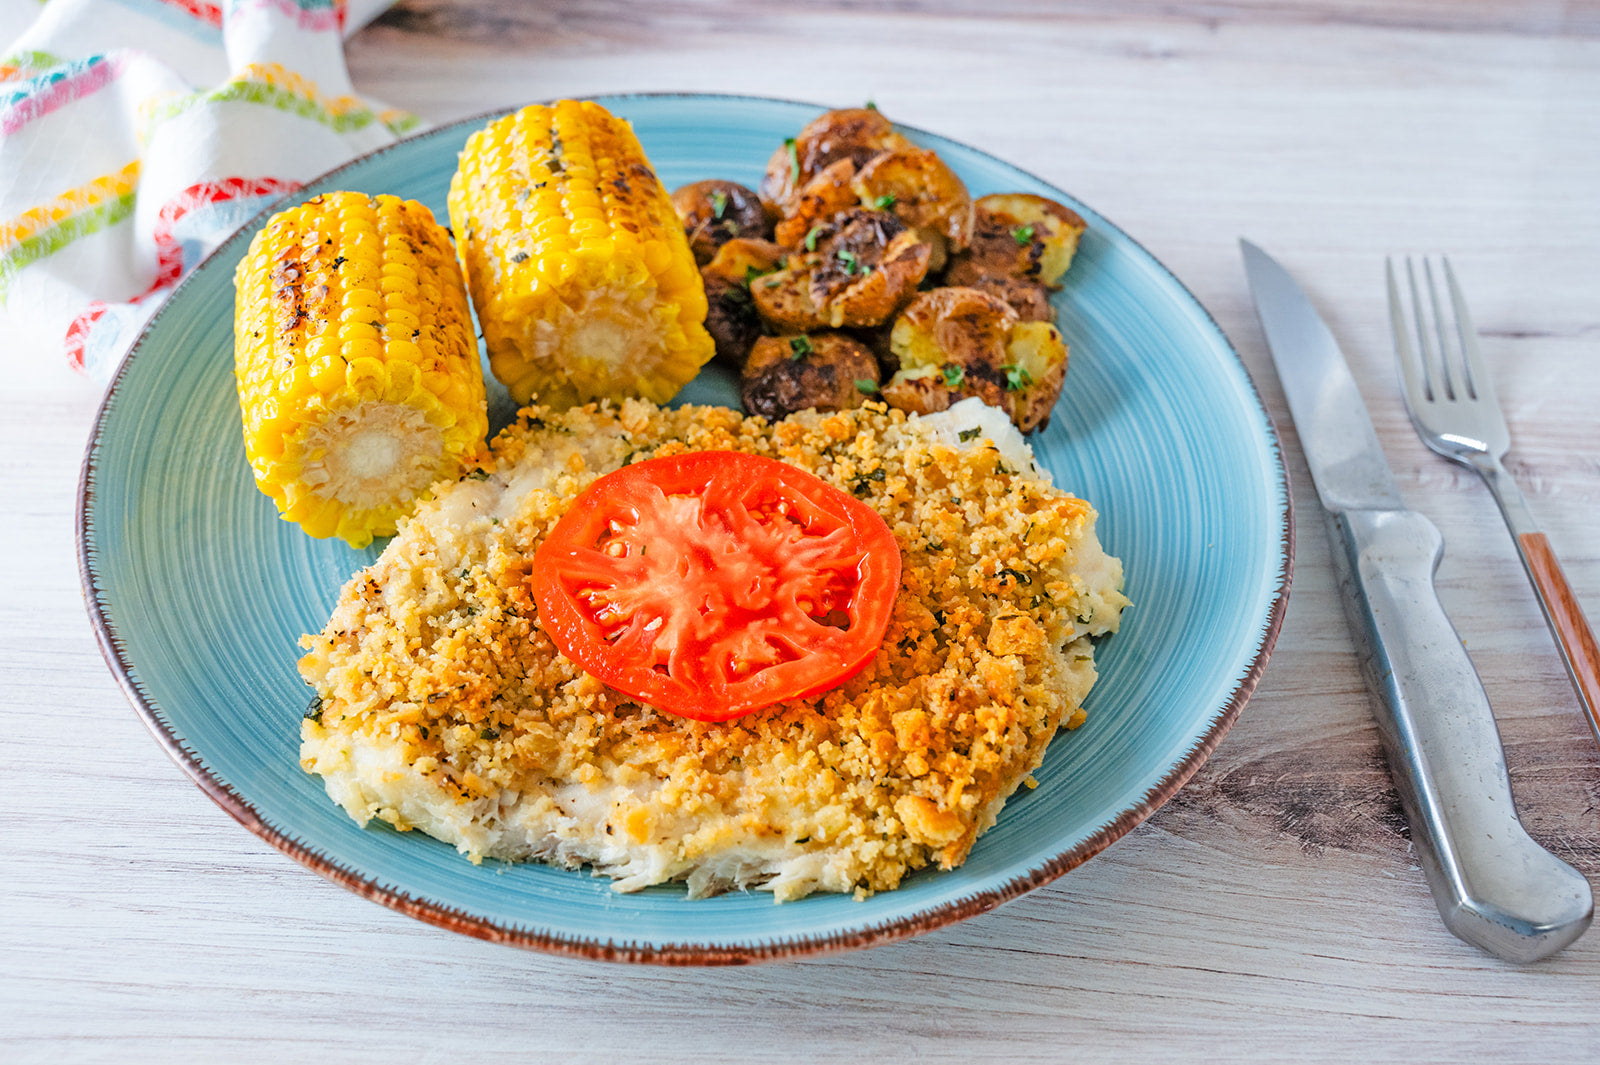 New England baked haddock with corn and mushrooms